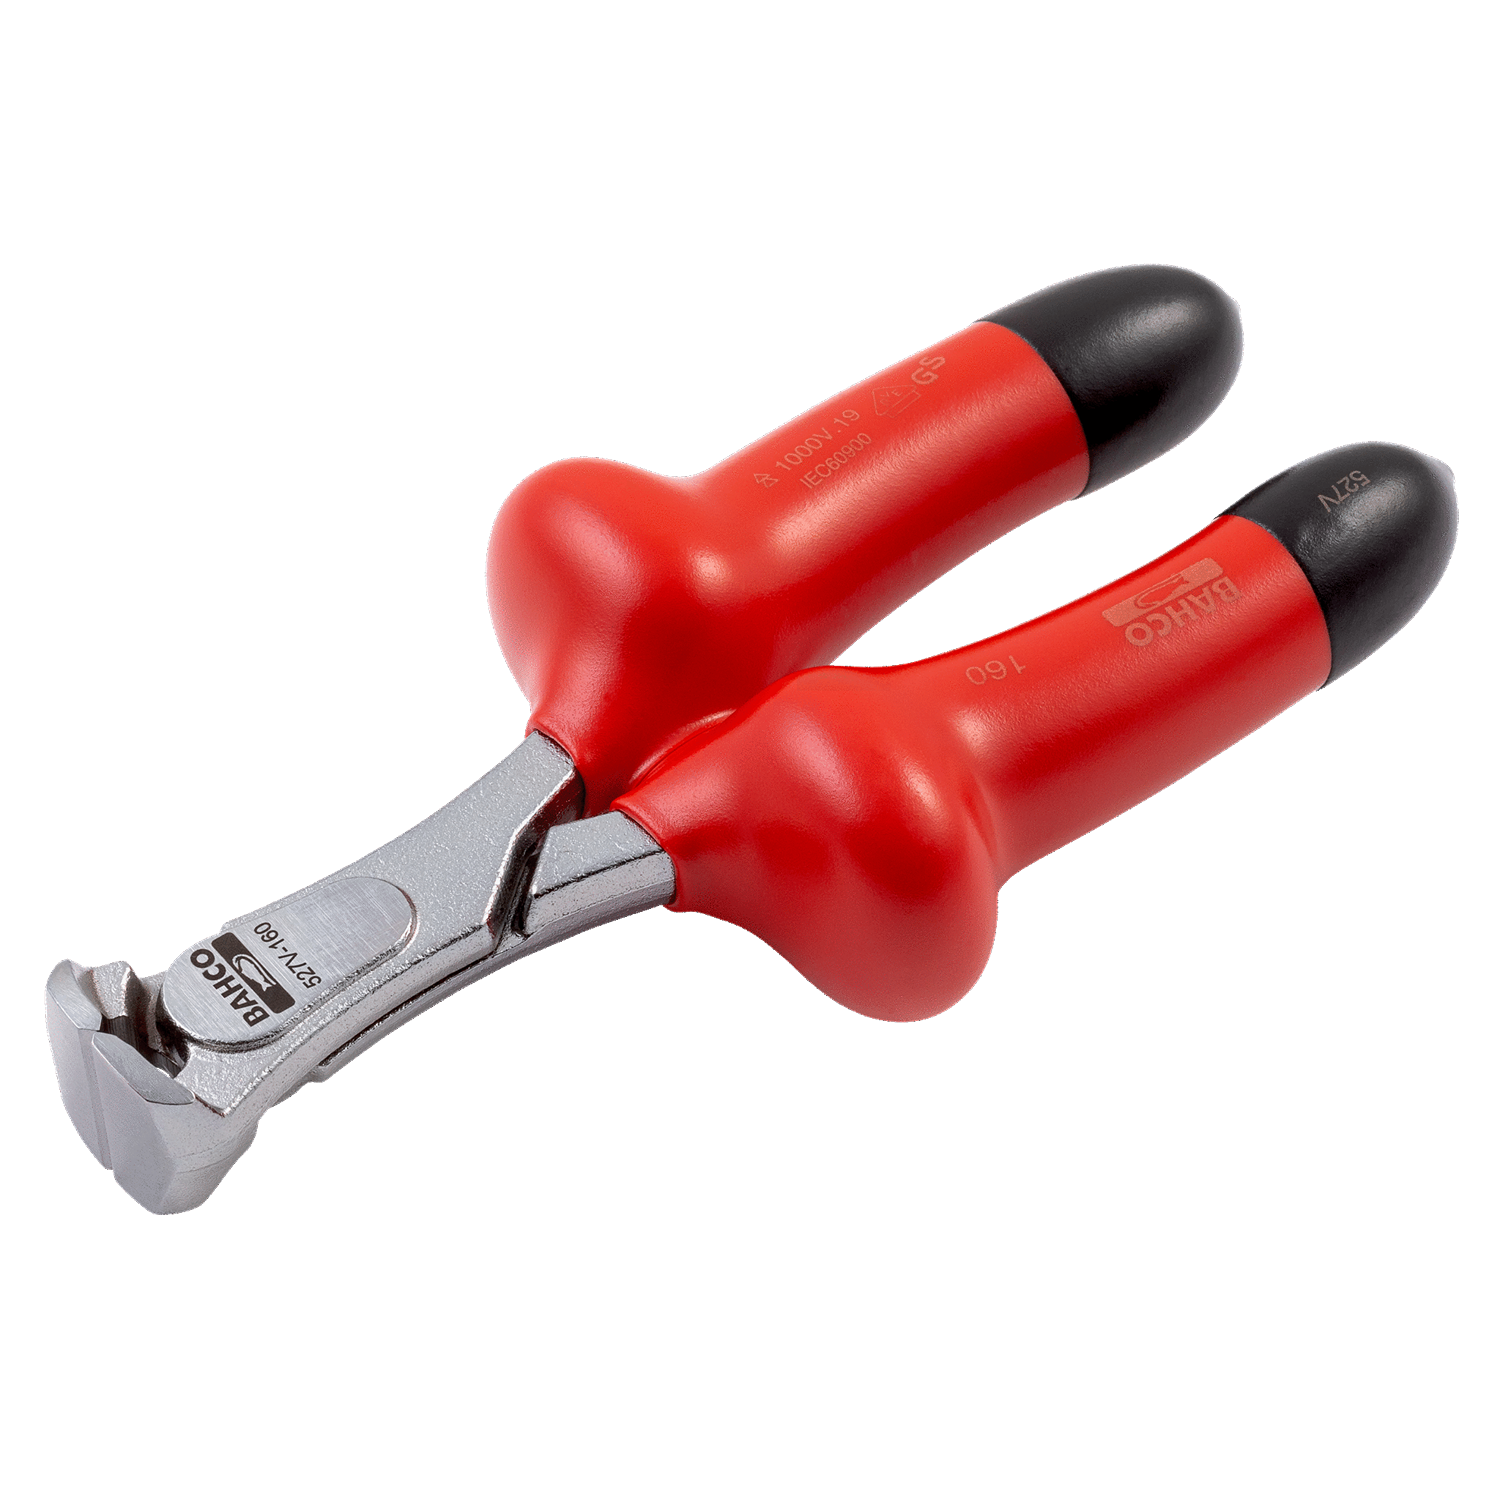 BAHCO 527V VDE Insulated End Cutter Pliers (BAHCO Tools) - Premium End Cutter from BAHCO - Shop now at Yew Aik.